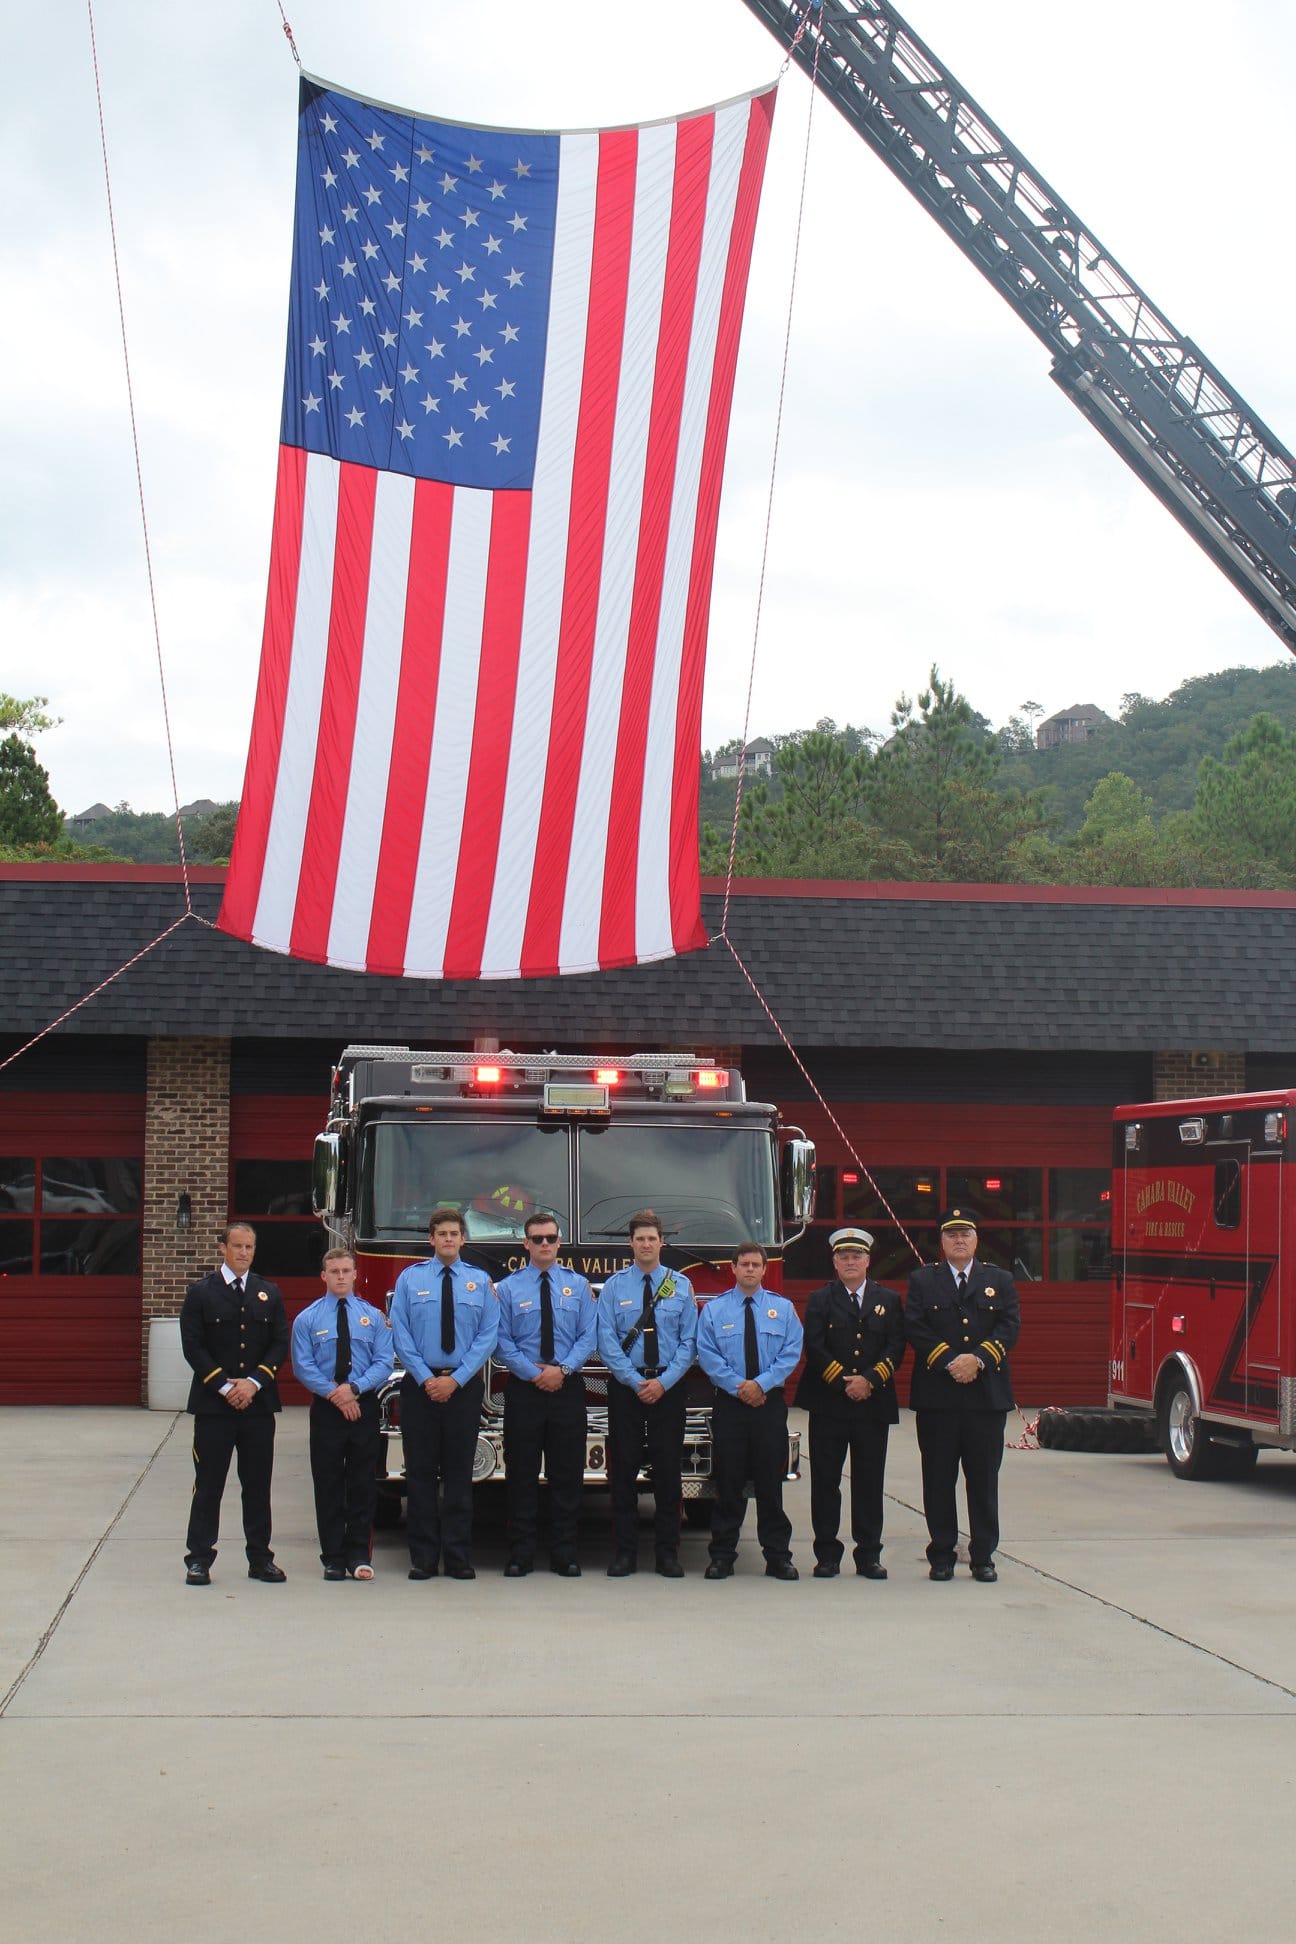 41440976 934316573440067 5965788532822769664 o Remembering September 11 with Birmingham area first responders